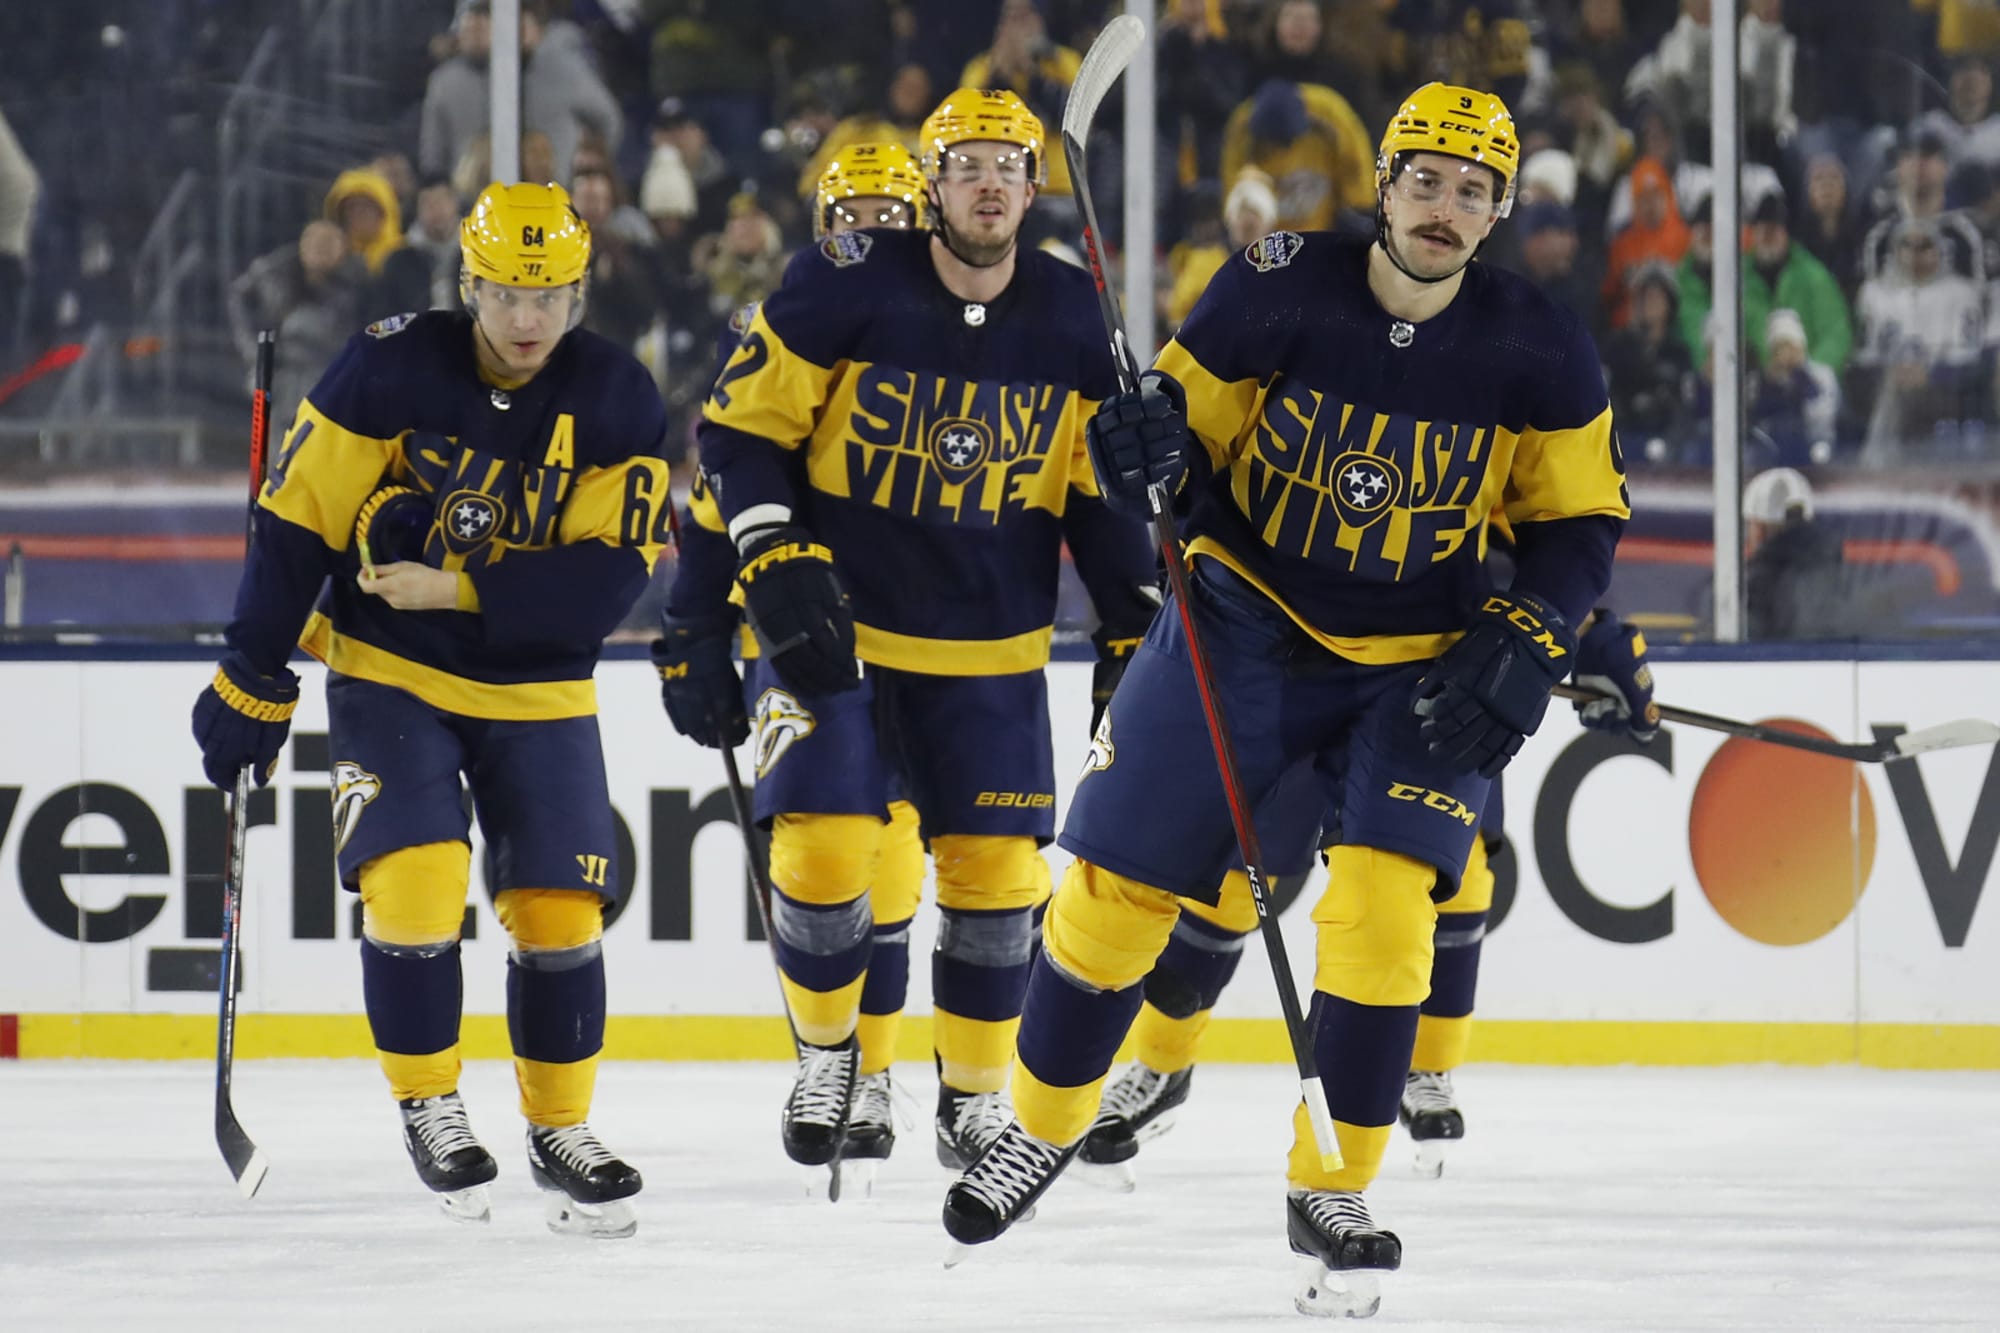 Nashville Predators Will Get an Inside Look from National TV Audiences